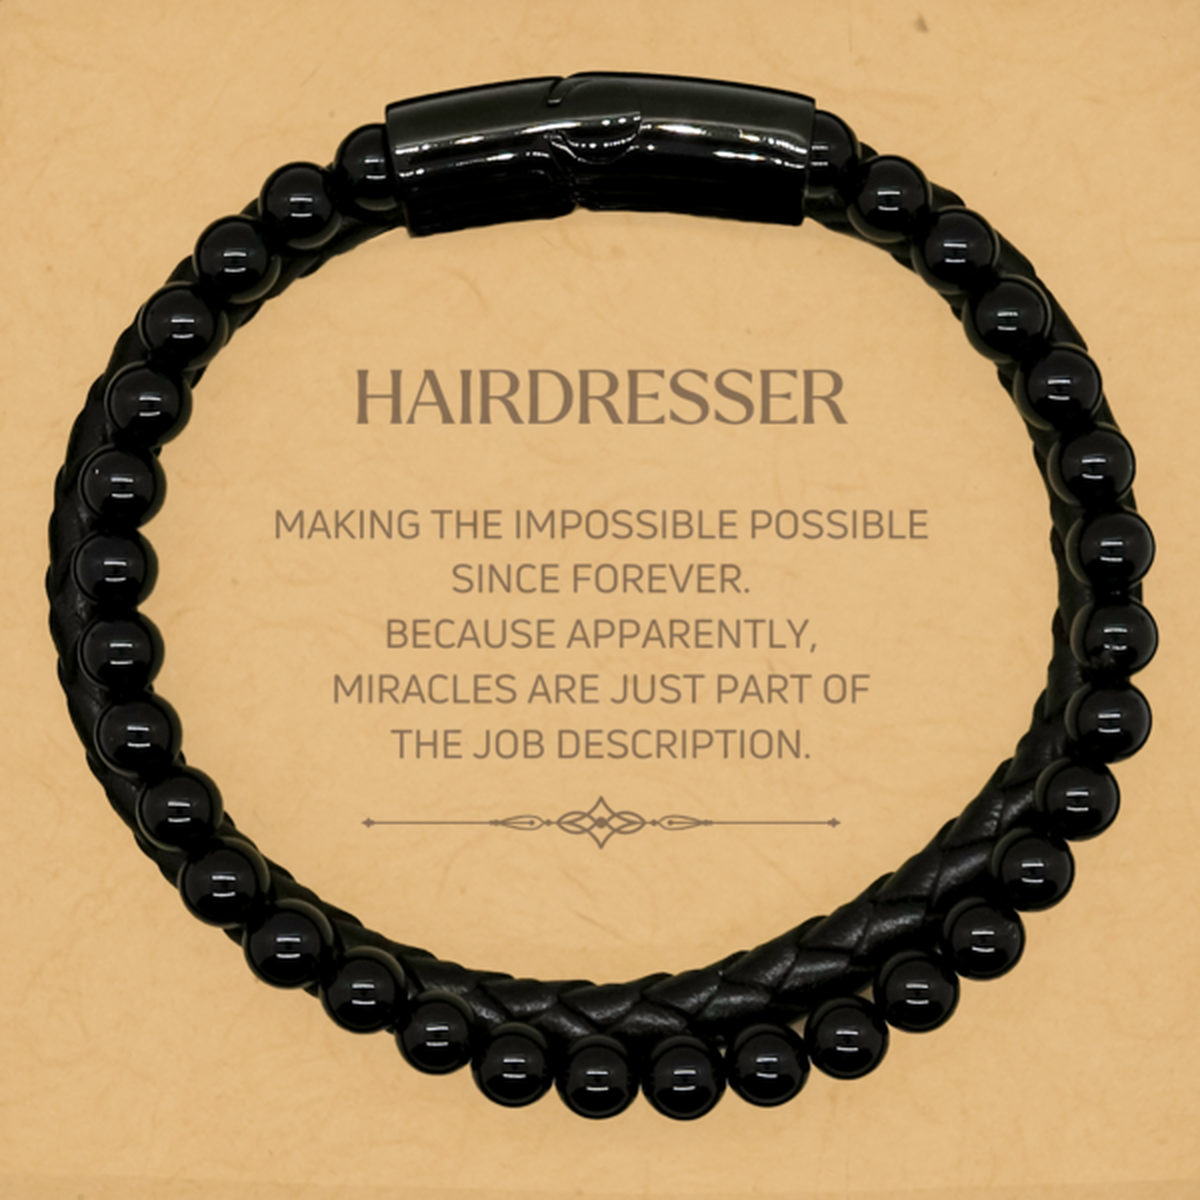 Funny Hairdresser Gifts, Miracles are just part of the job description, Inspirational Birthday Stone Leather Bracelets For Hairdresser, Men, Women, Coworkers, Friends, Boss